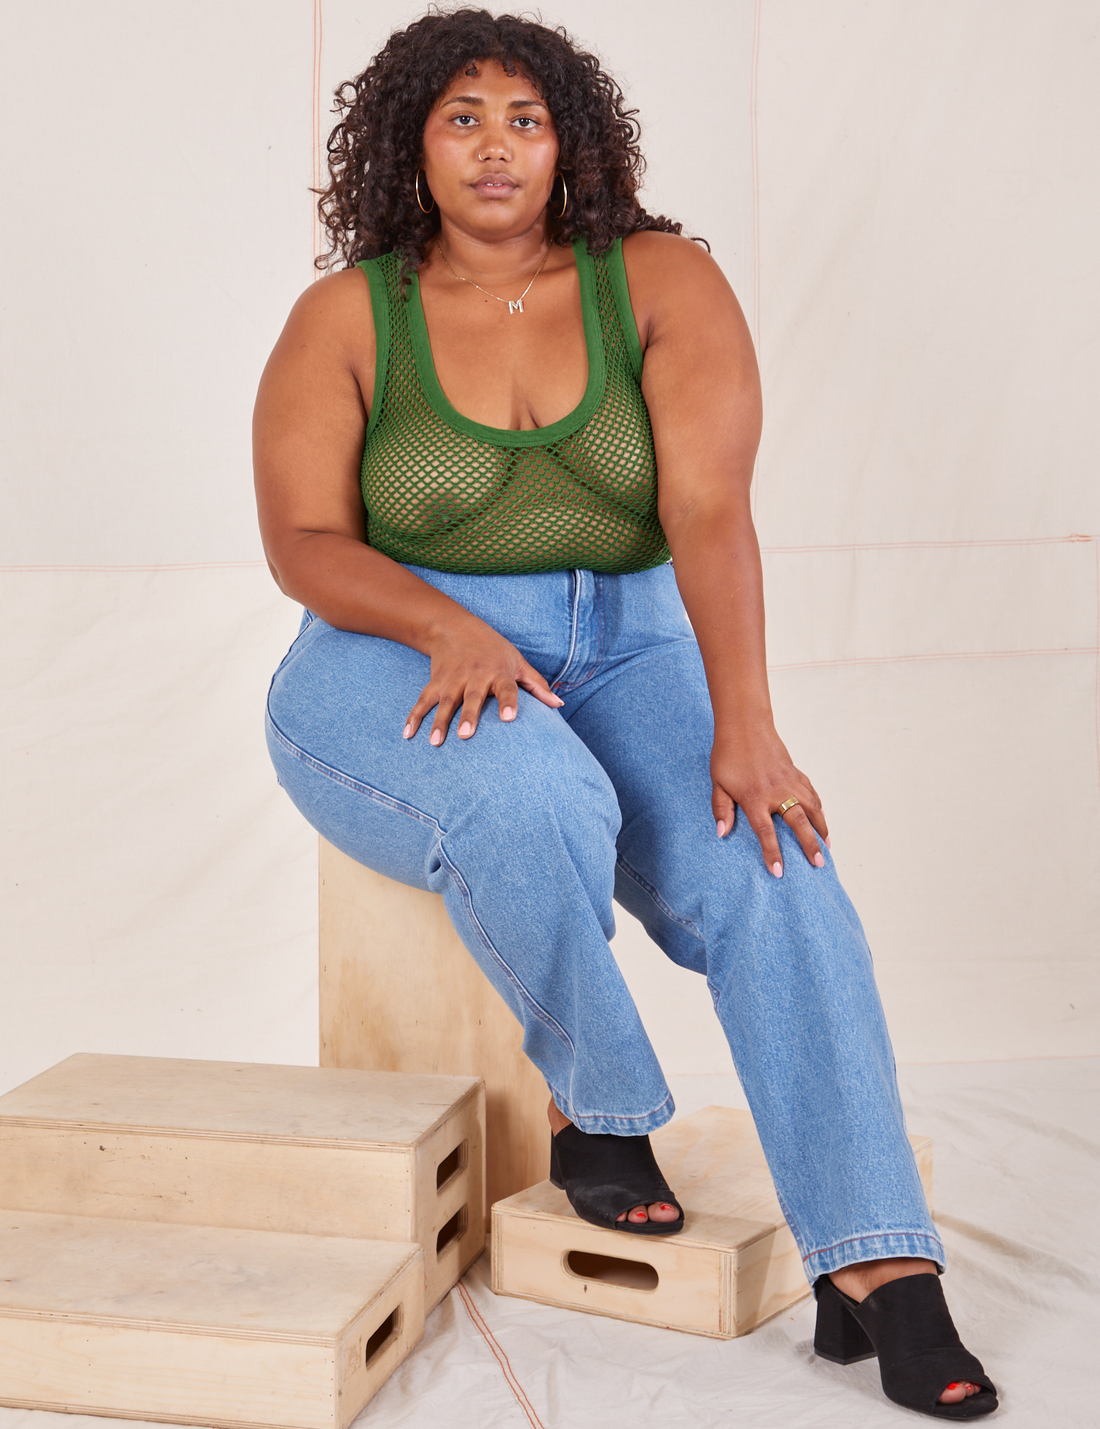 Morgan is sitting on a wooden crate wearing Mesh Tank Top in Lawn Green and light wash Frontier Jeans